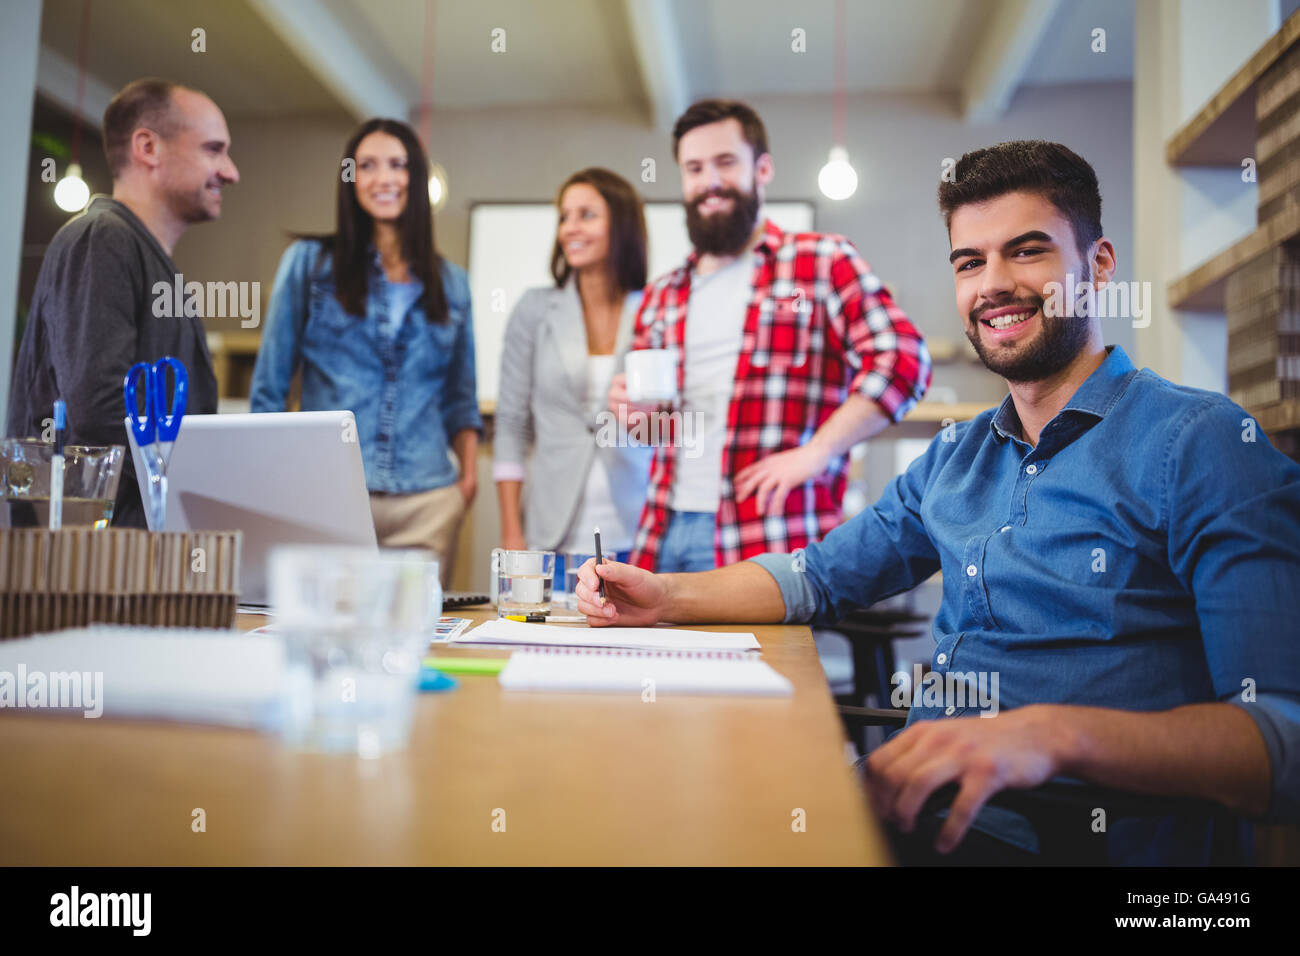 Confident creative businessman with colleagues standing by table Stock Photo